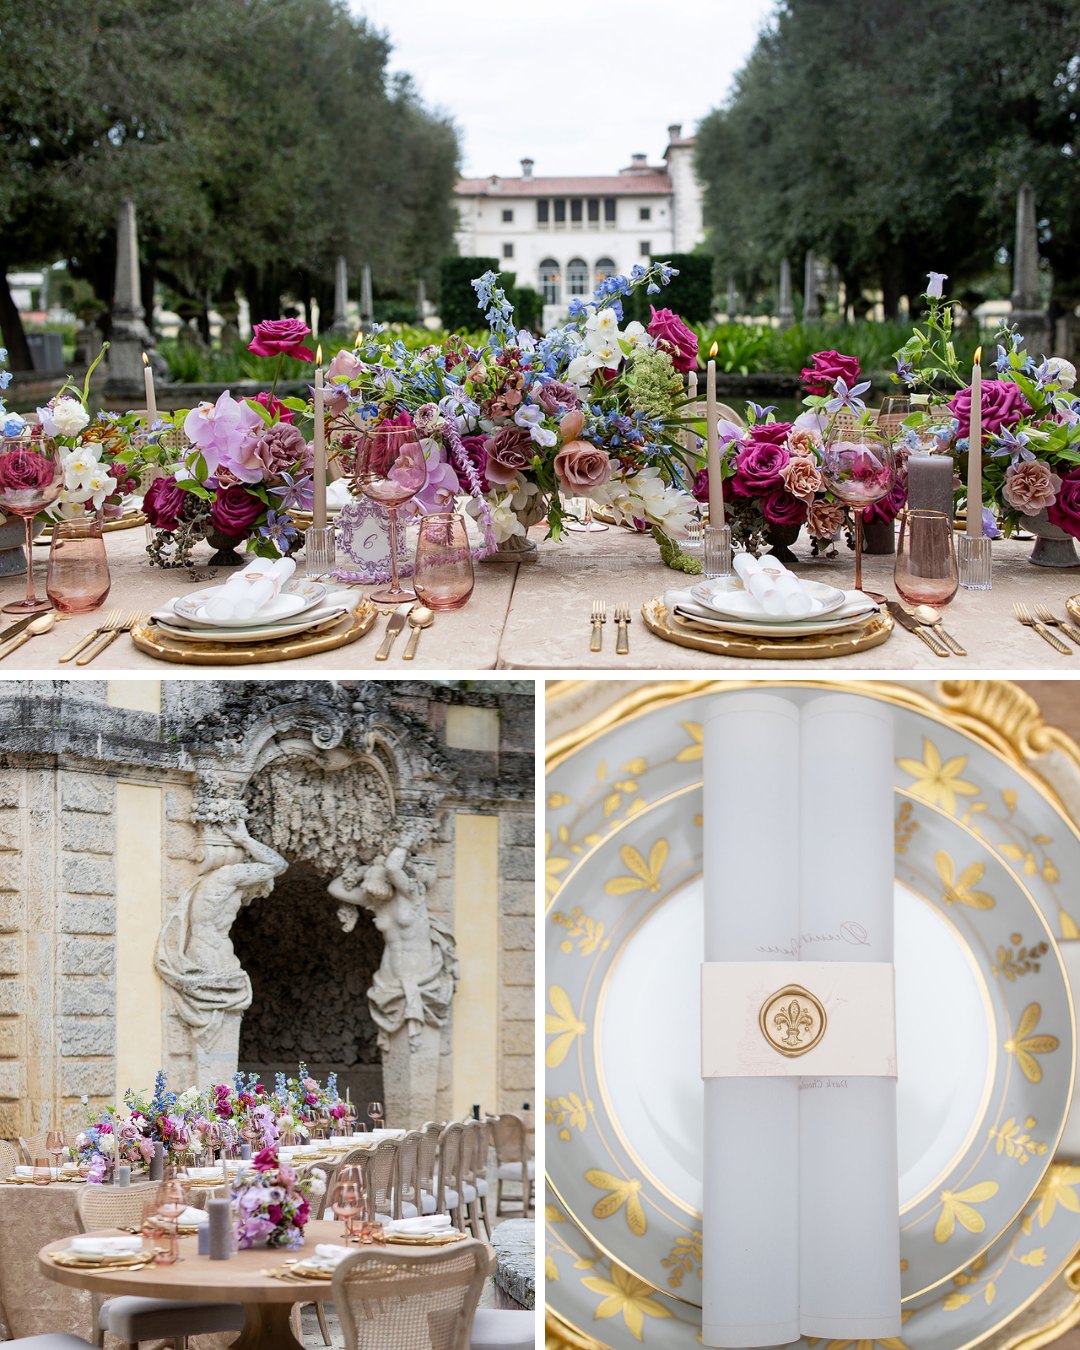 reception table decor with blue, pink, purple and white floral centerpieces; table in front of stone sculptures and archway; white plate with gold floral details and rim 